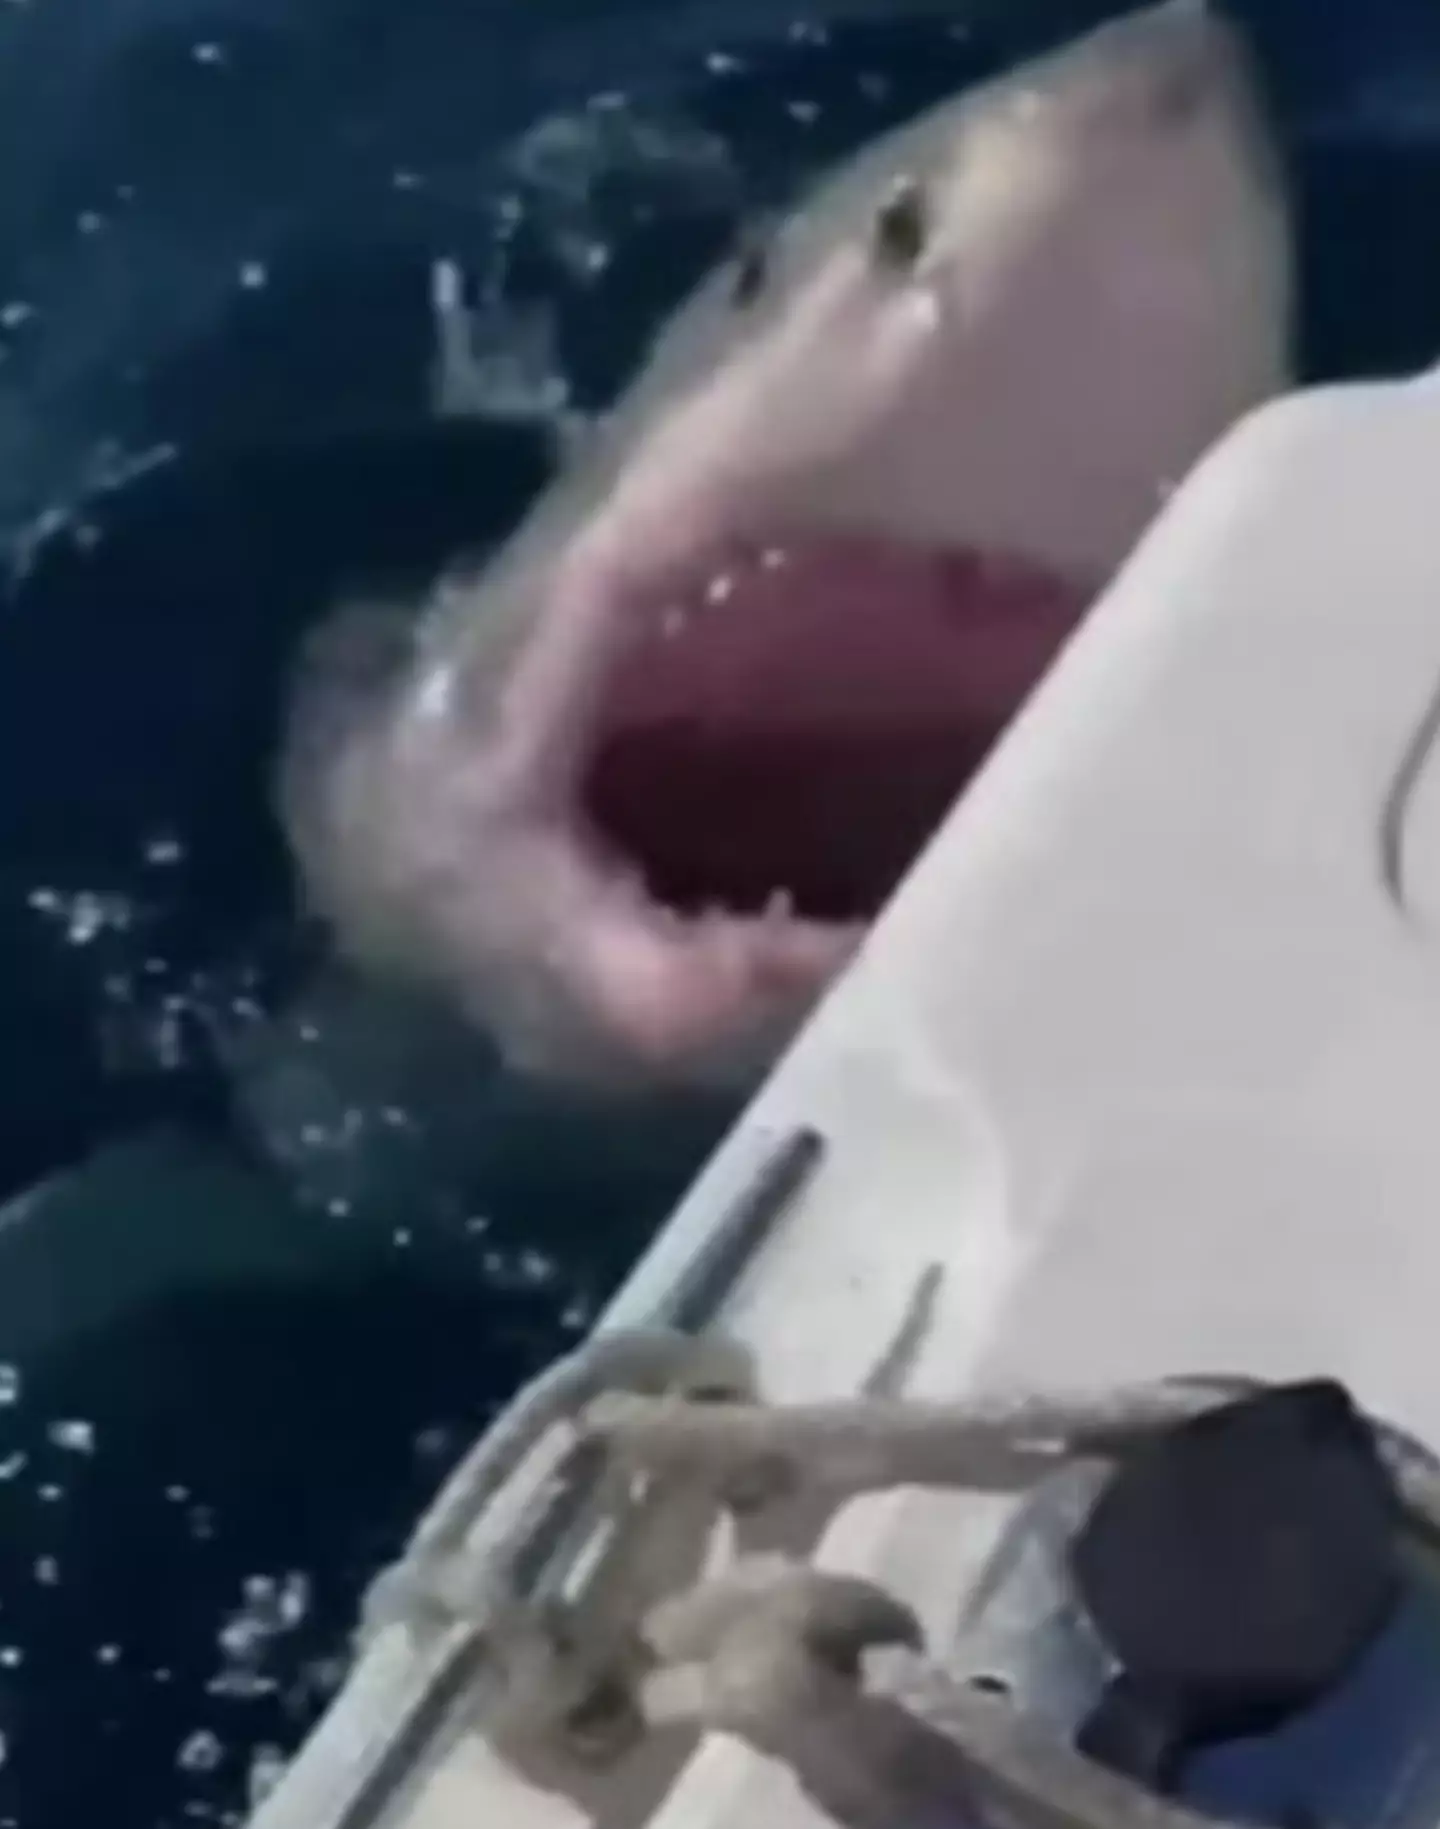 The shark launched itself at the boat.